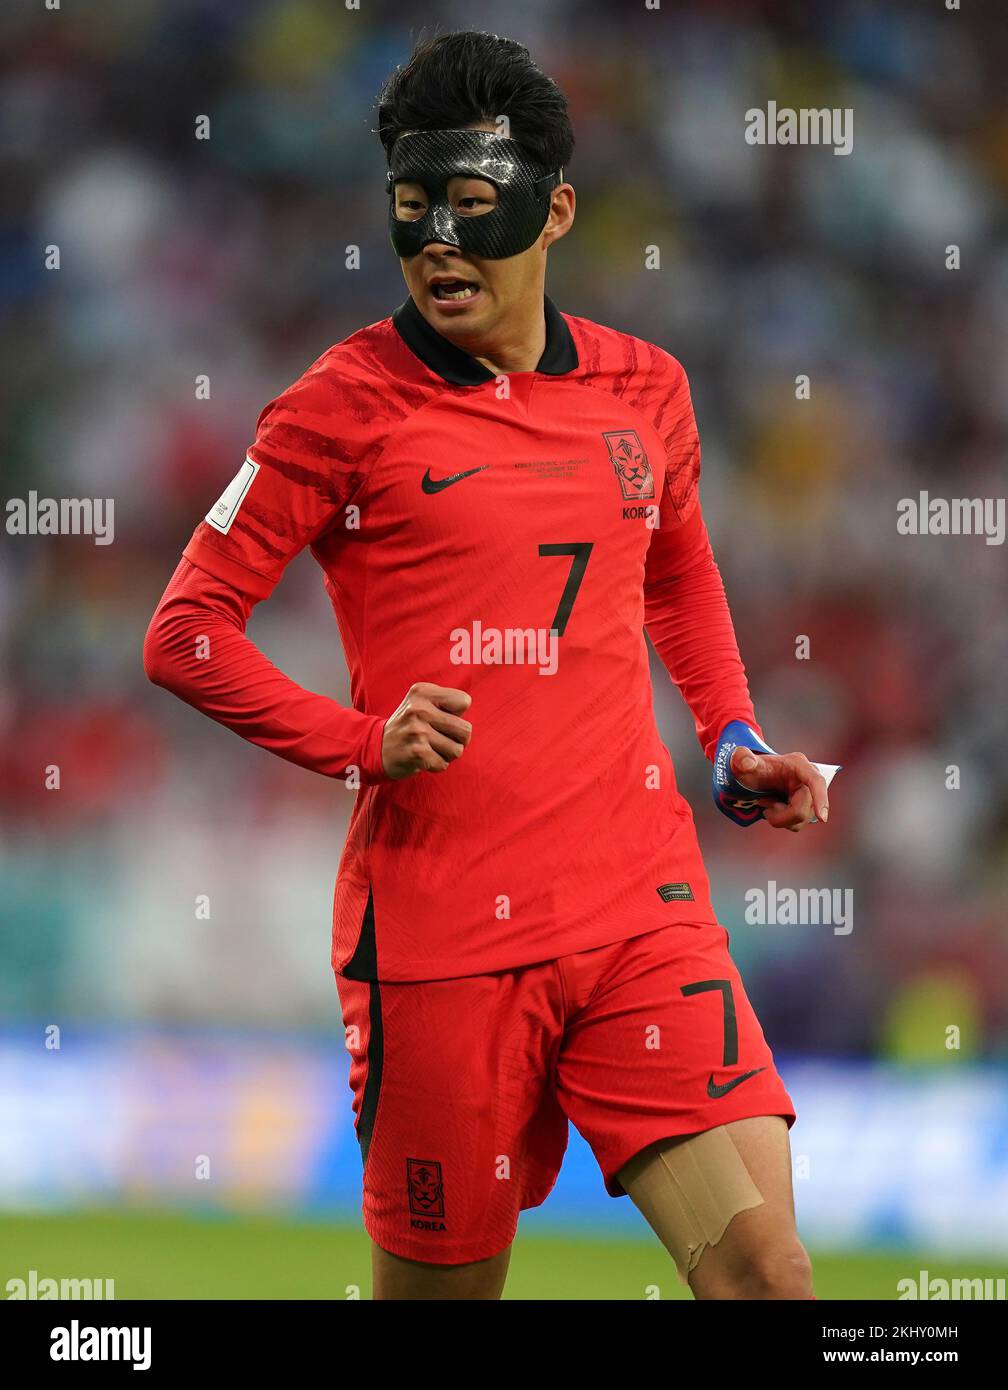 South Korea's Son Heung-min during the FIFA World Cup Group H match at the Education City Stadium, Doha, Qatar. Picture date: Thursday November 24, 2022. Stock Photo